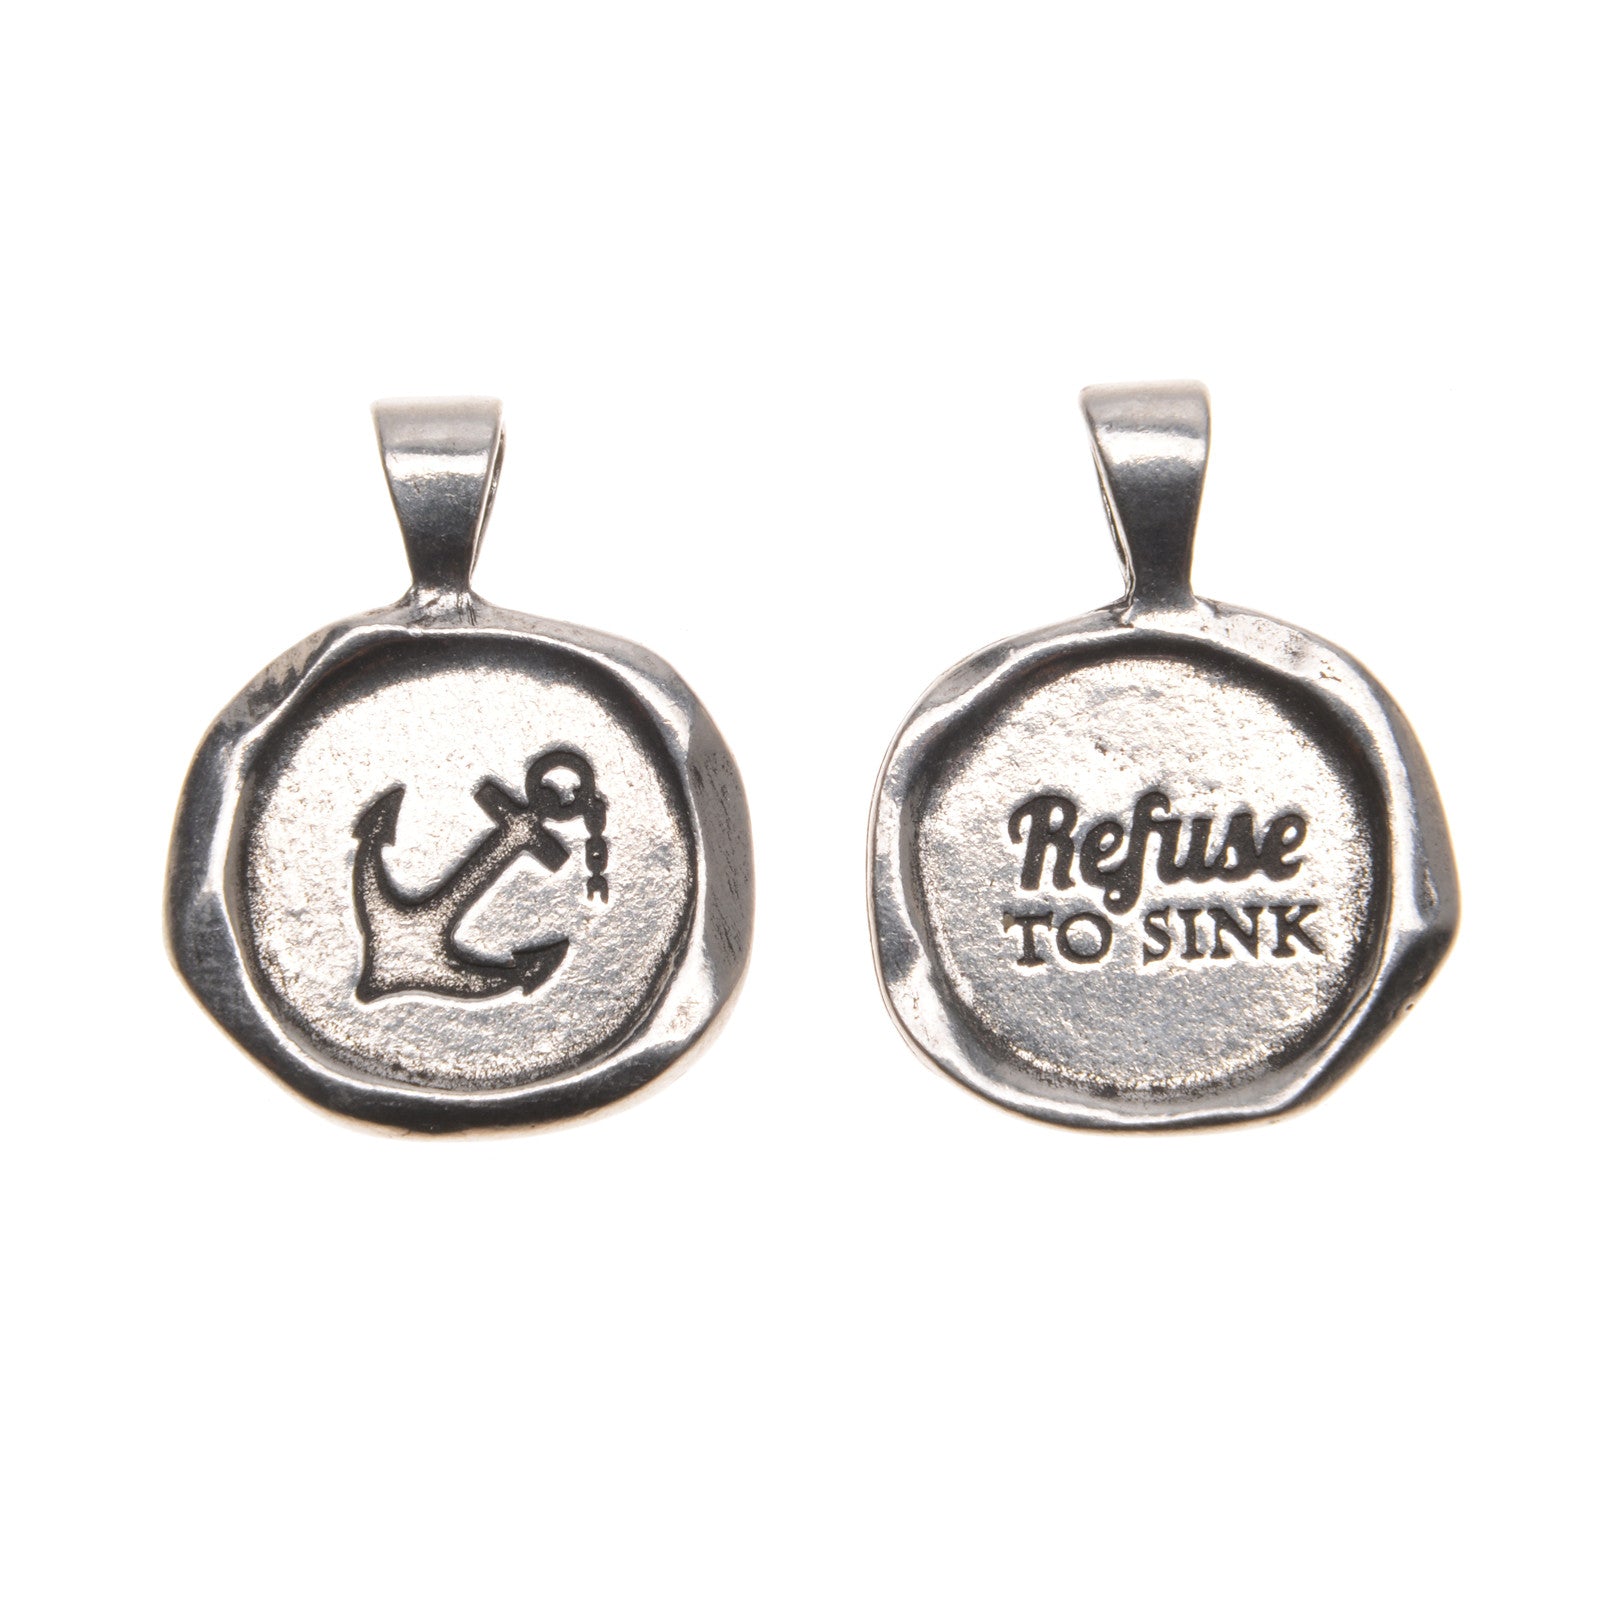 Refuse to Sink Wax Seal front and back